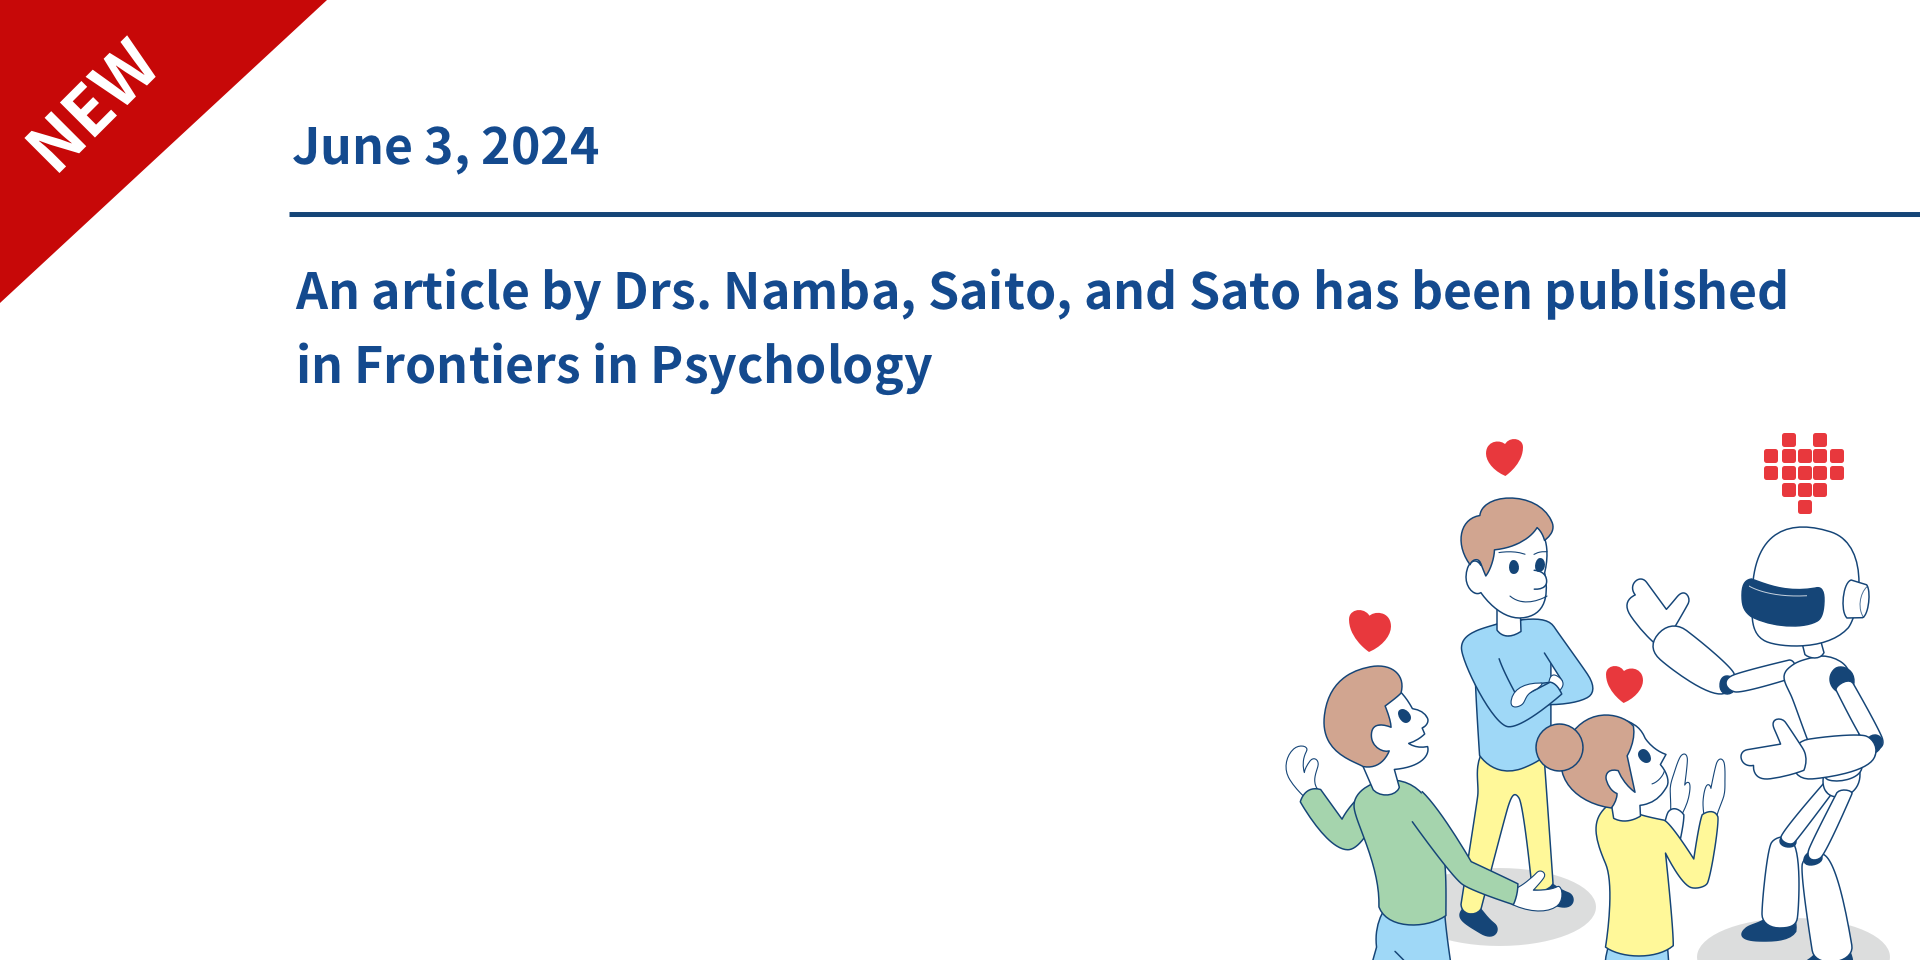 An article by Drs. Namba, Saito, and Sato has been published in Frontiers in Psychology